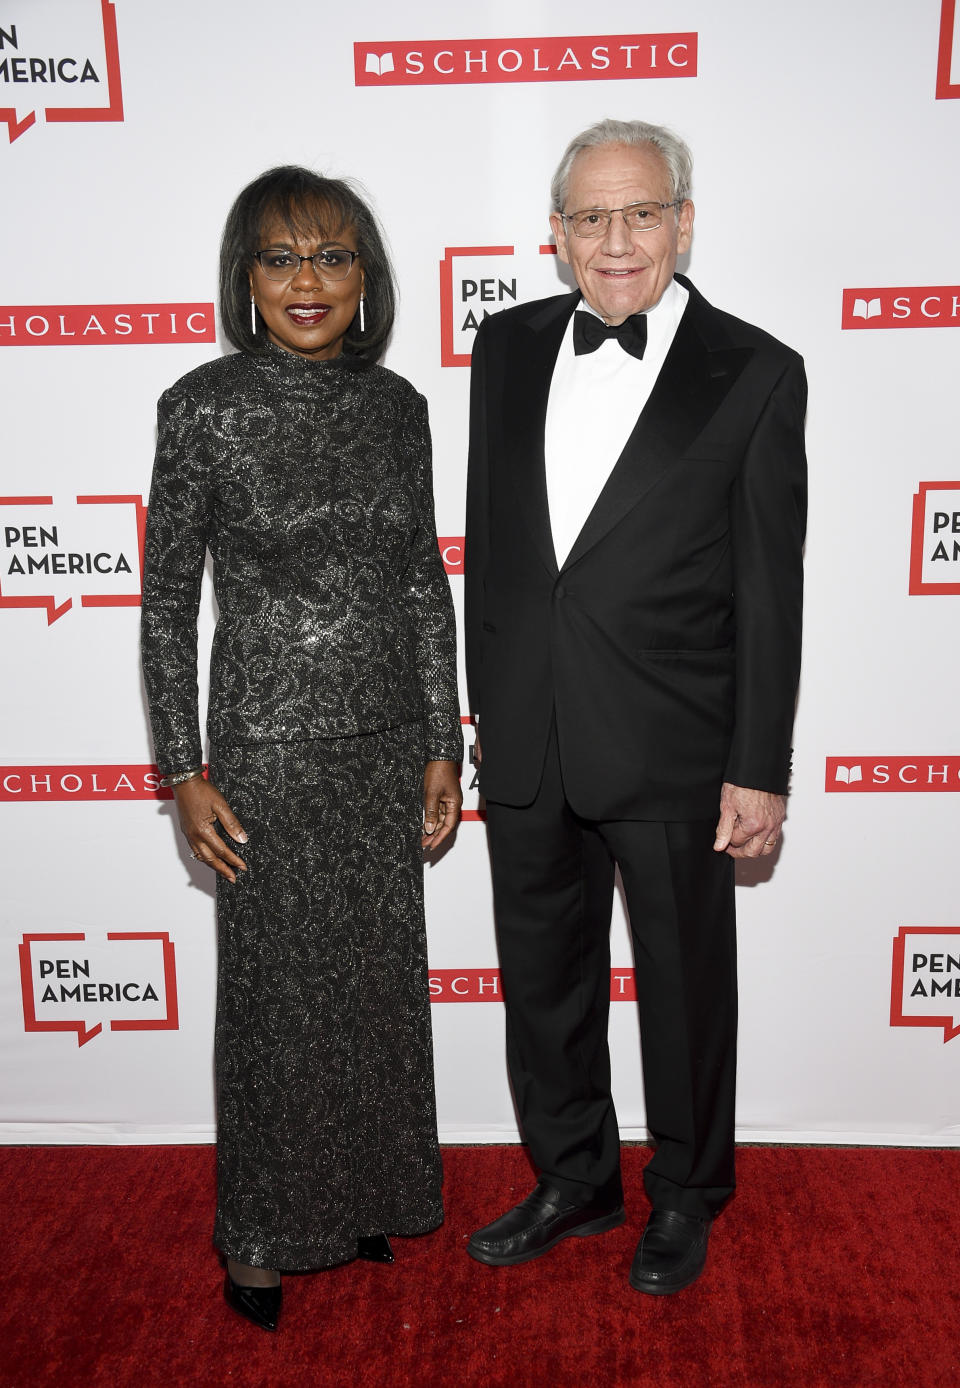 PEN courage award recipient Anita Hill, left, and PEN literary service award recipient Bob Woodward pose together at the 2019 PEN America Literary Gala at the American Museum of Natural History on Tuesday, May 21, 2019, in New York. (Photo by Evan Agostini/Invision/AP)